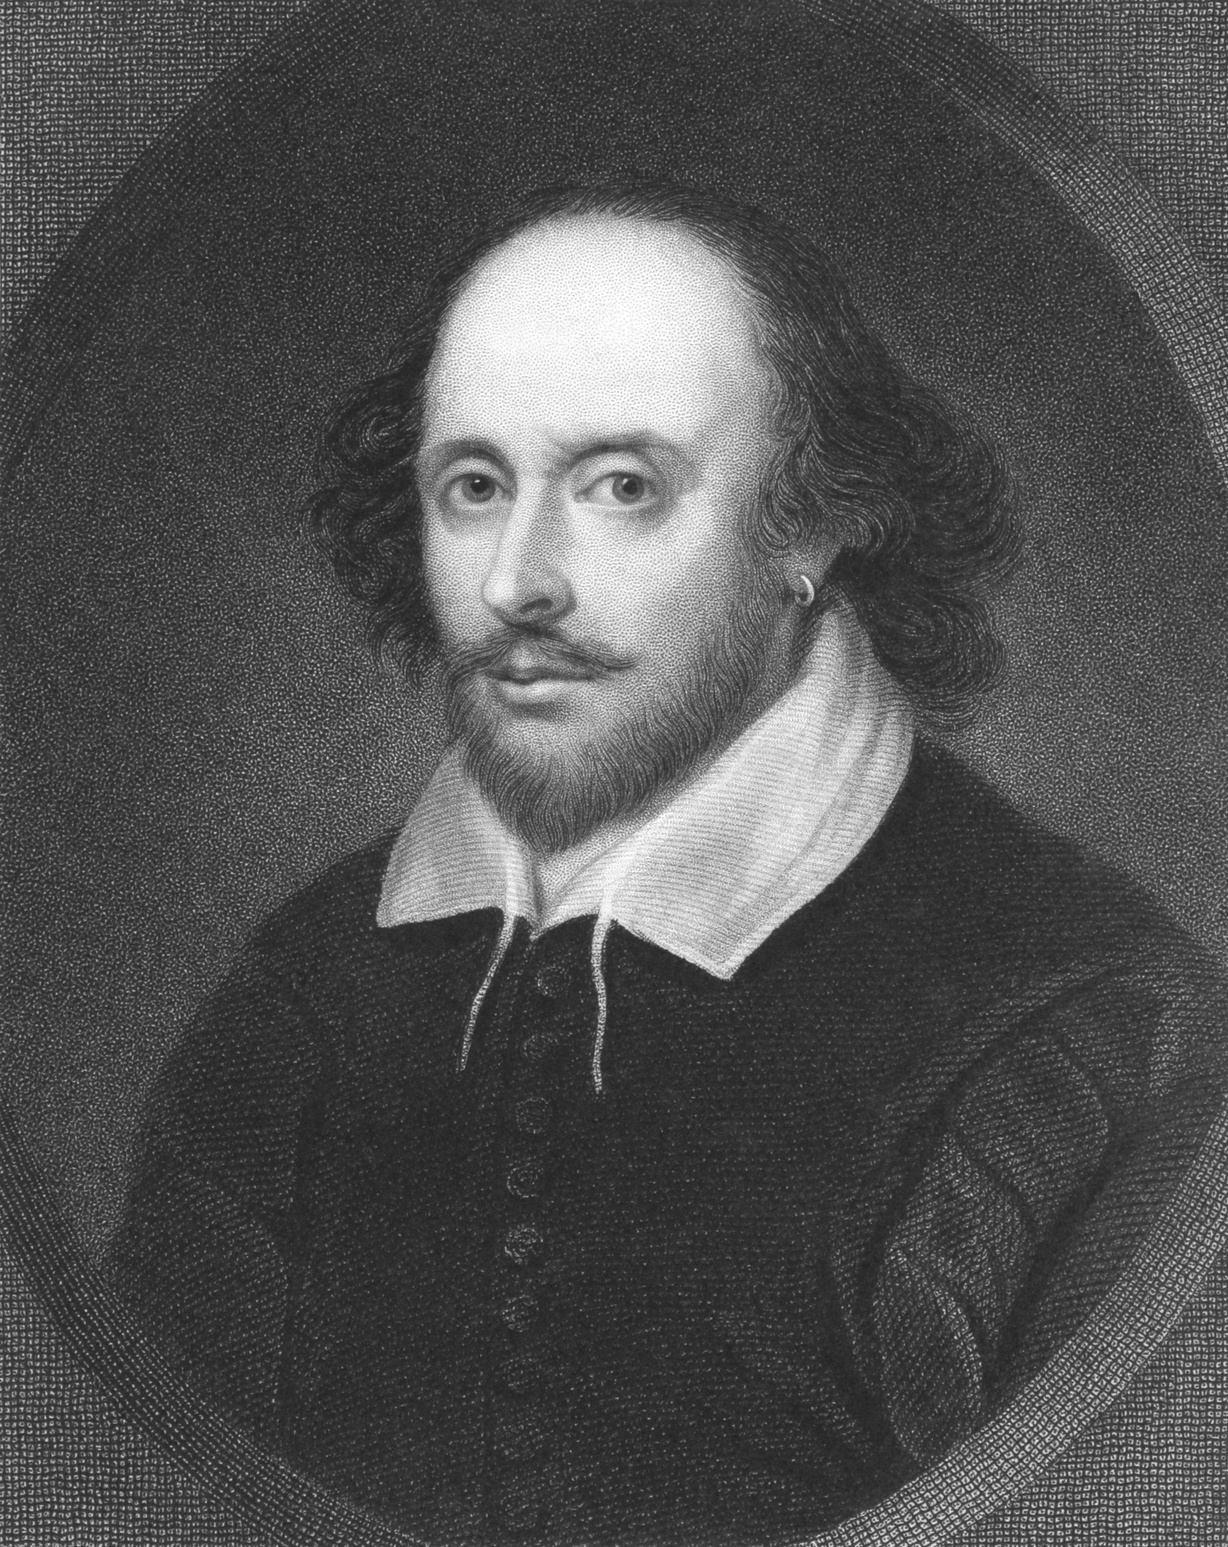 A William Shakespeare Poster